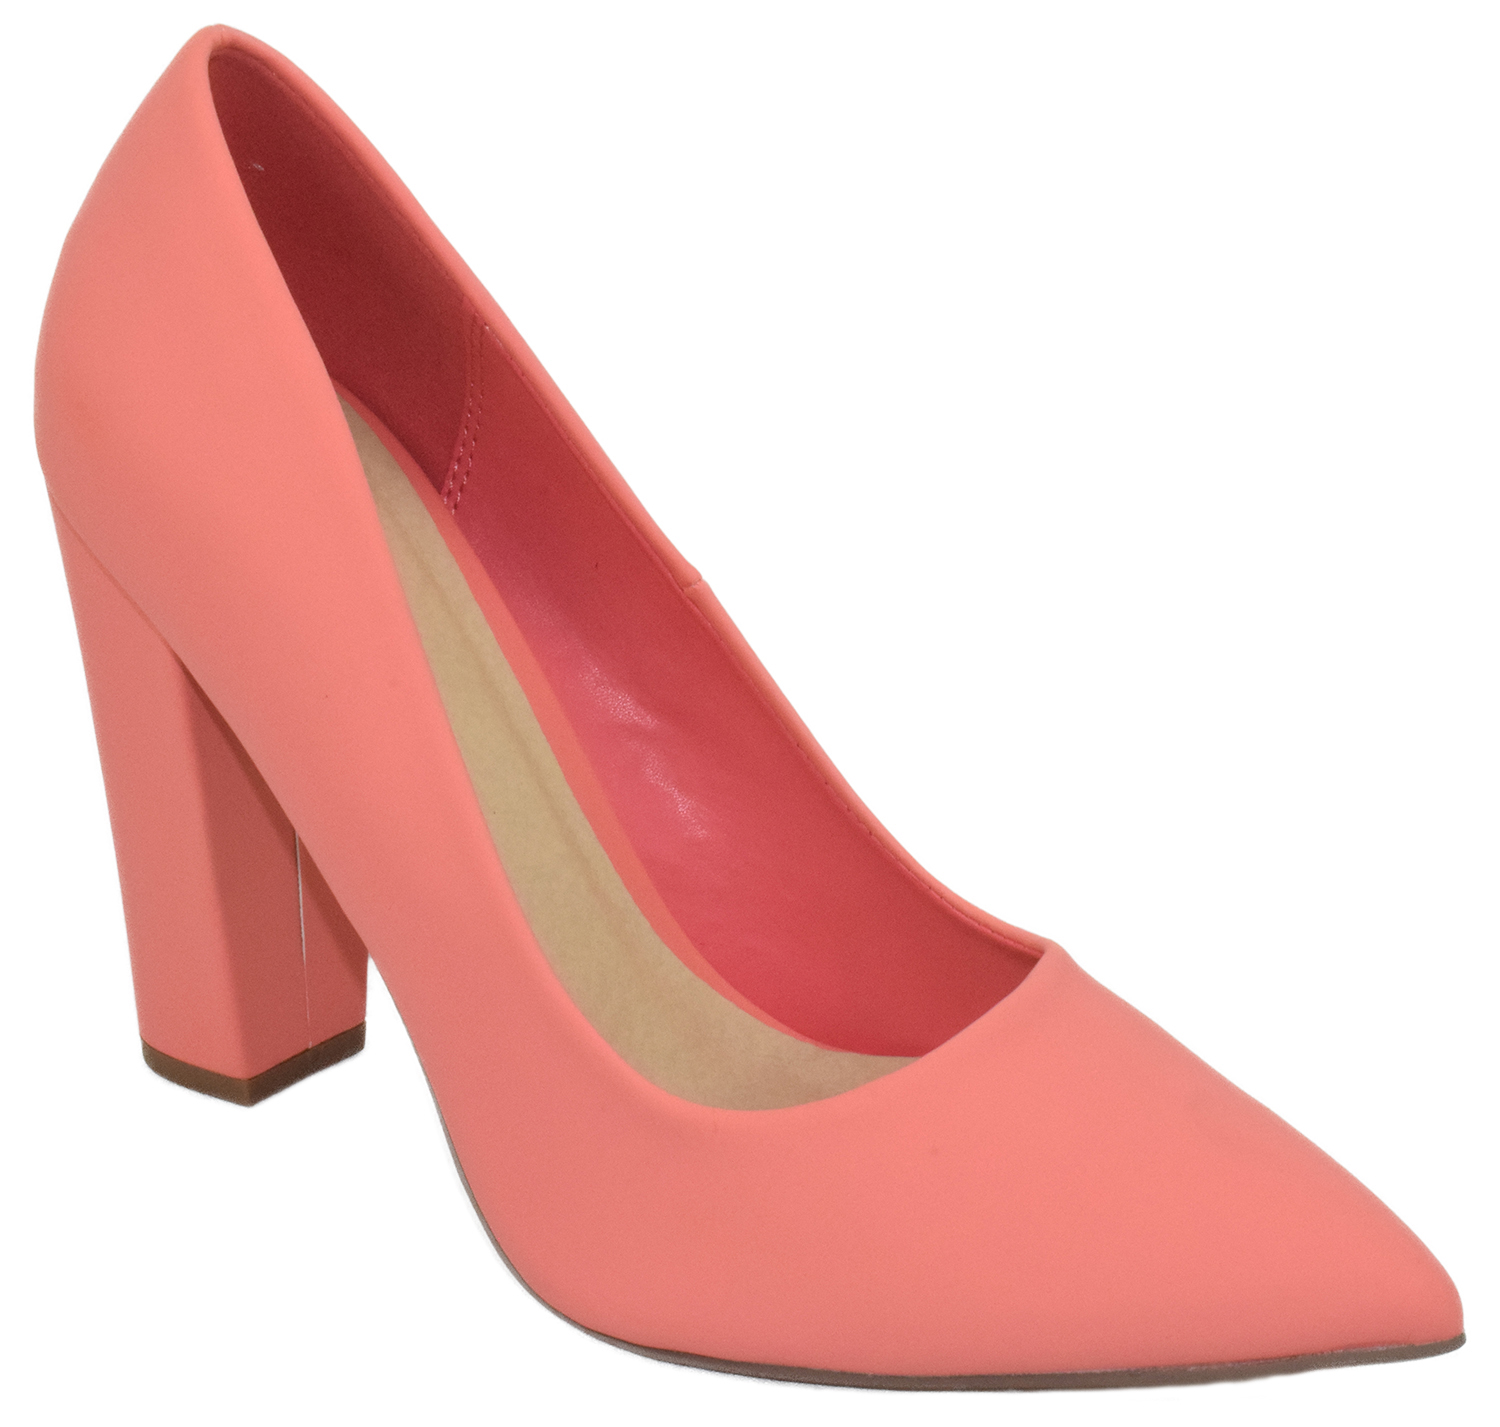 Not Just A Pump Women Thick Chunky Block High Heels Pointed Toe Dress / Casual Shoes OGDEN-S Pink Coral 9 - image 1 of 2